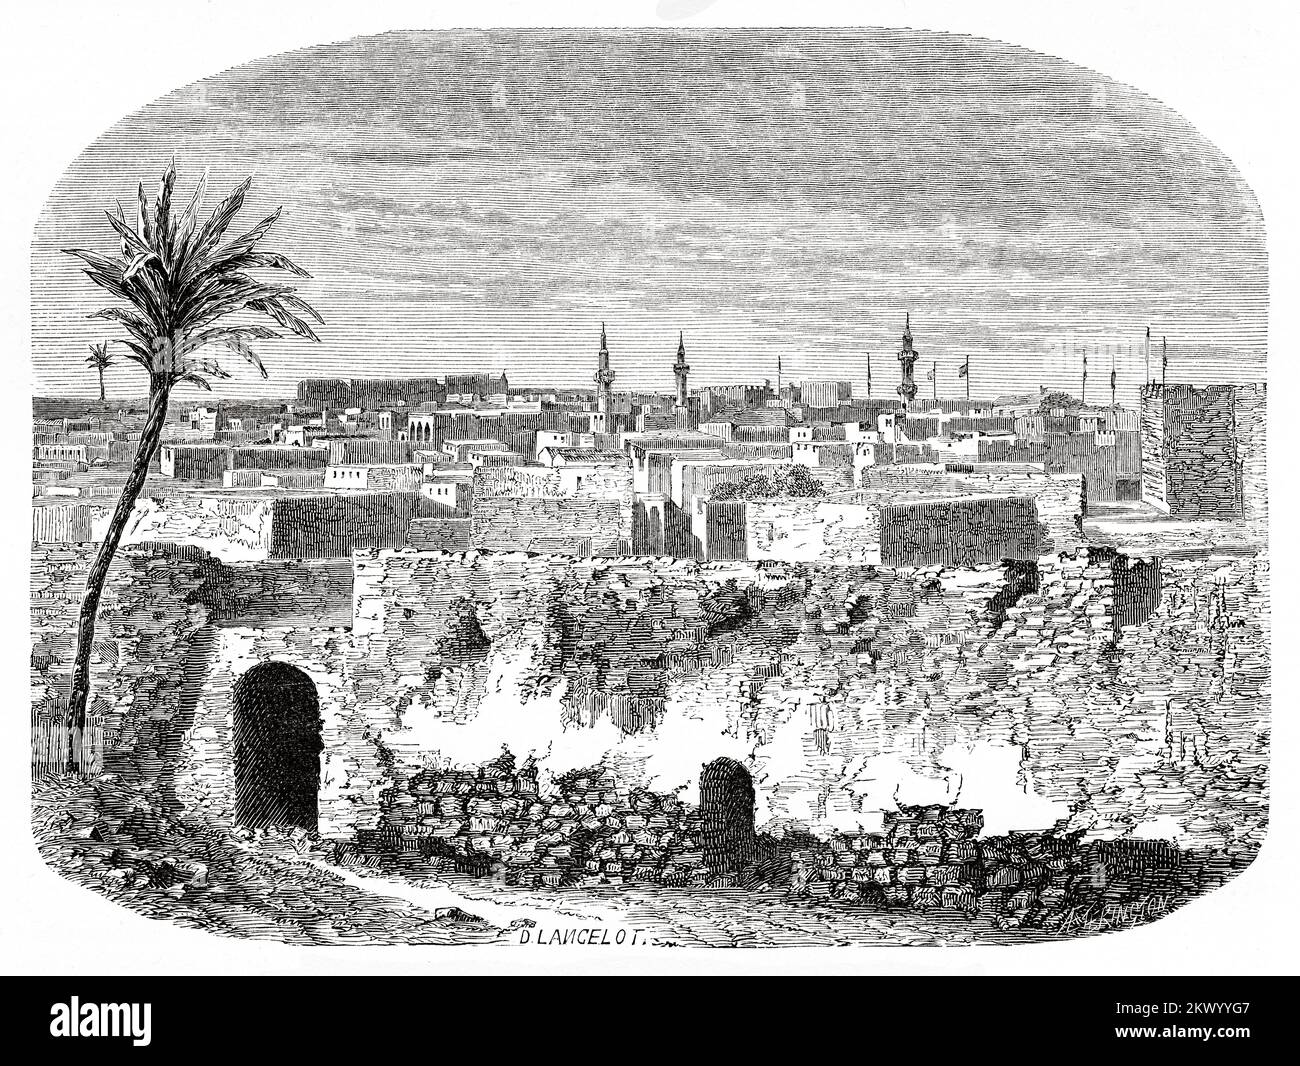 Panoramic general view of the ancient city of Tripoli in 1850, Libya. North Africa Stock Photo